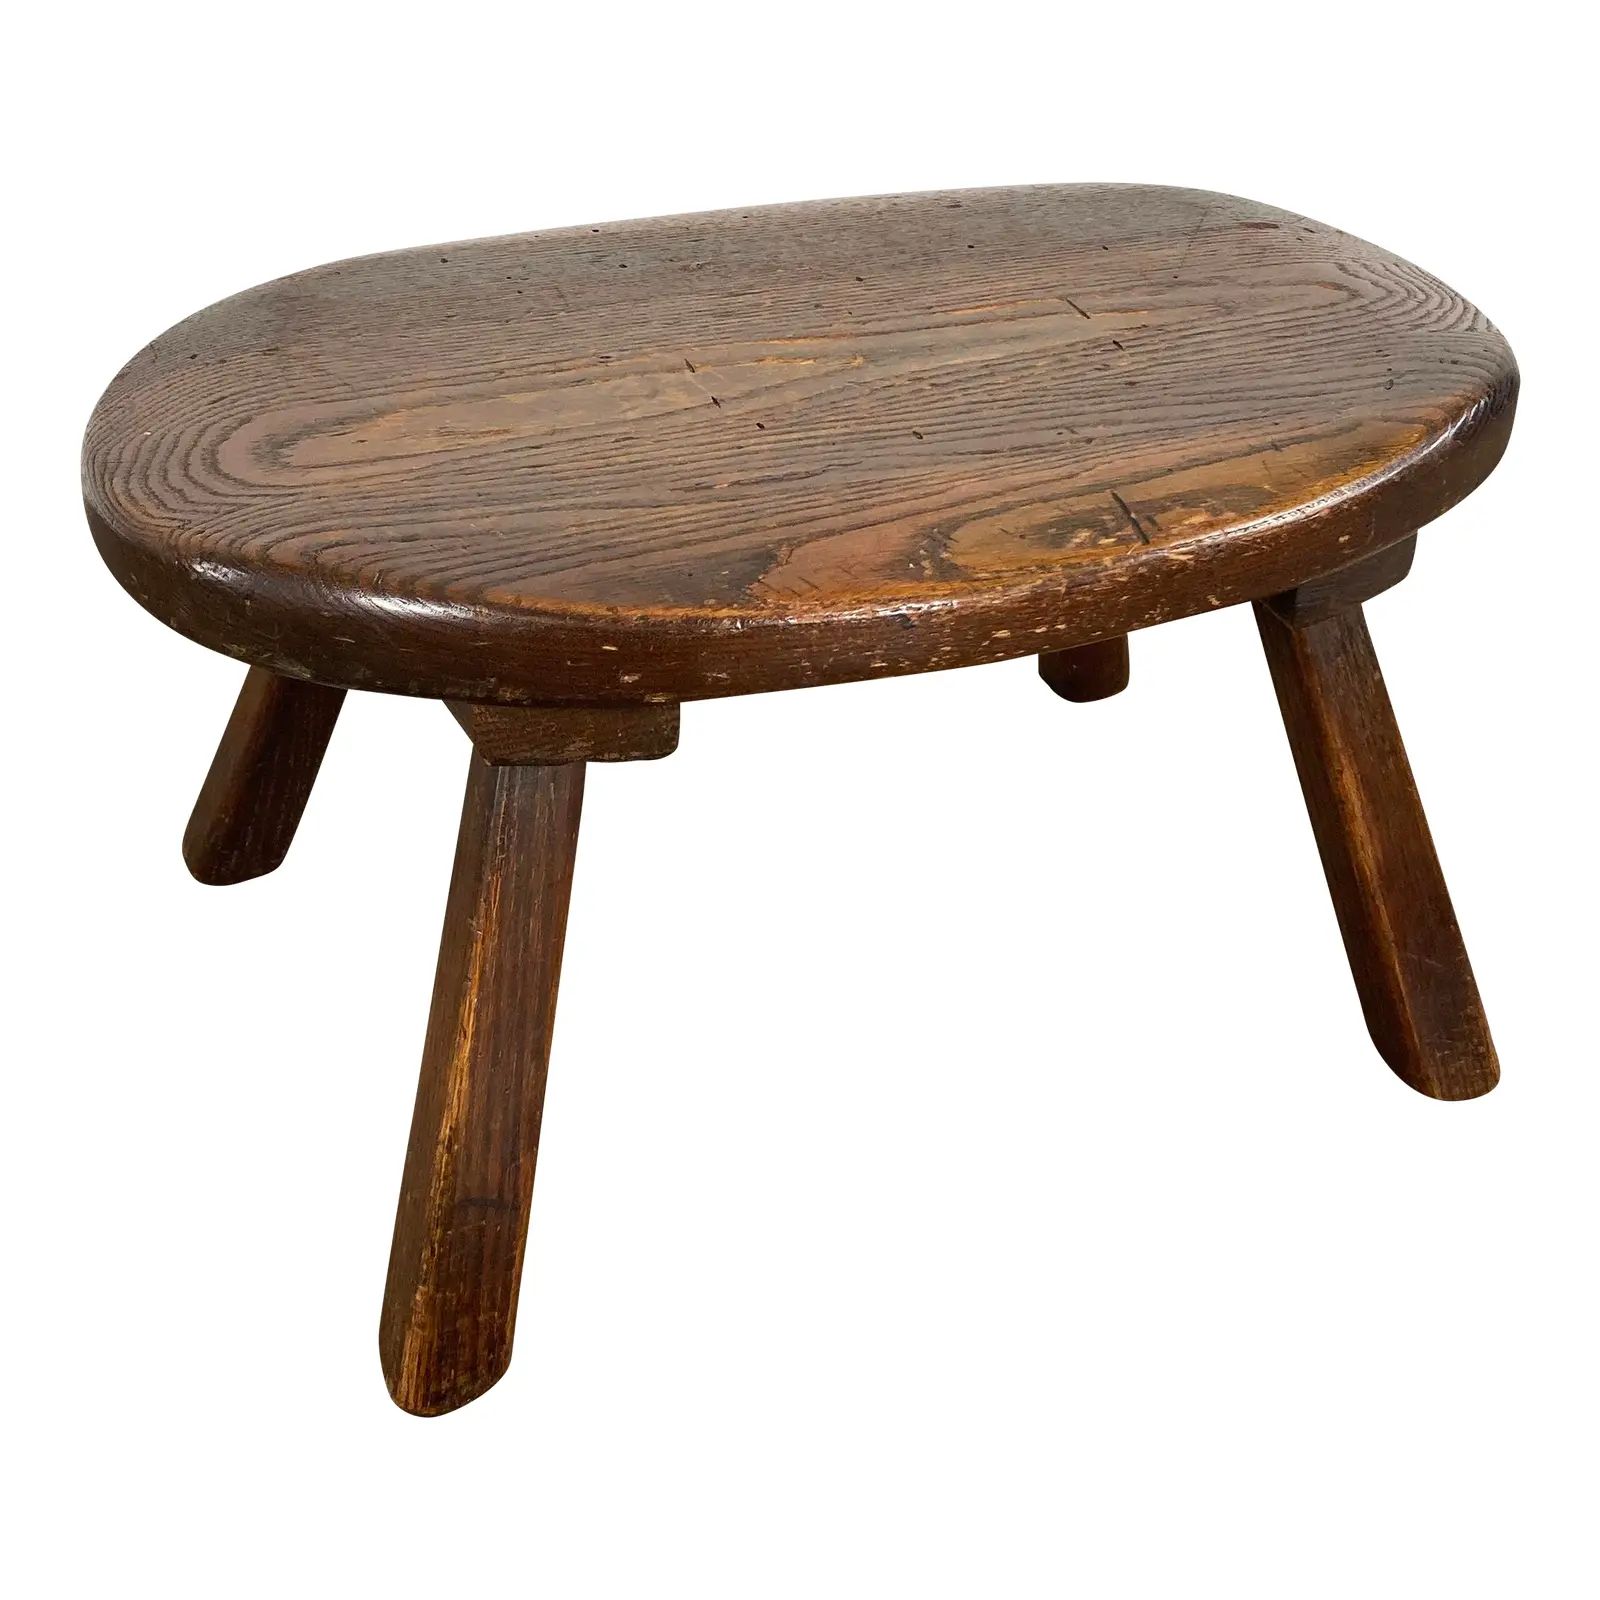 Antique Hand-Carved Wood Stool | Chairish